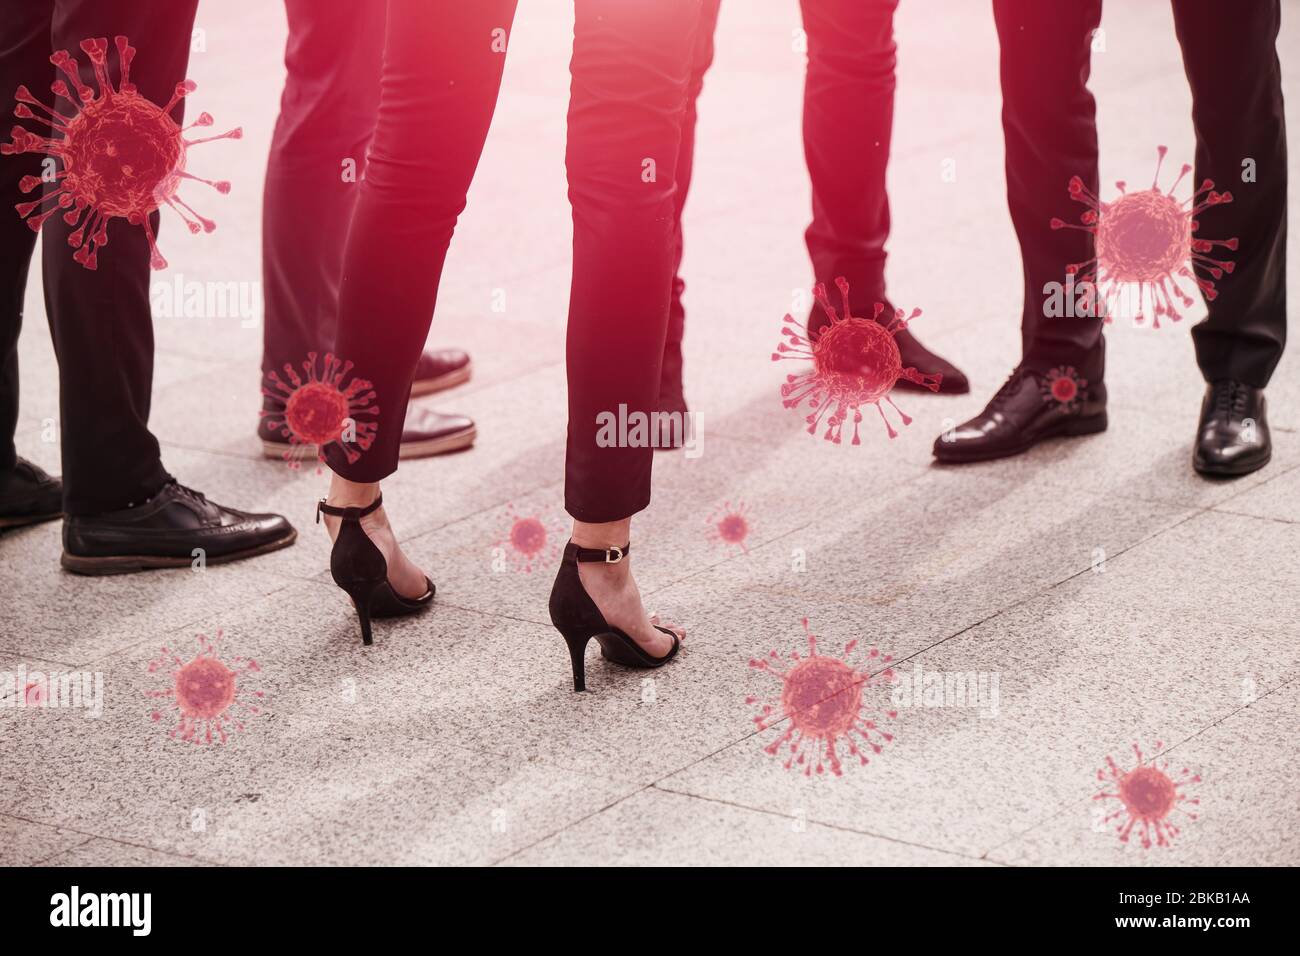 Closeup leg group of business people standing together risk to spreading of coronavirus virus infection. Stock Photo